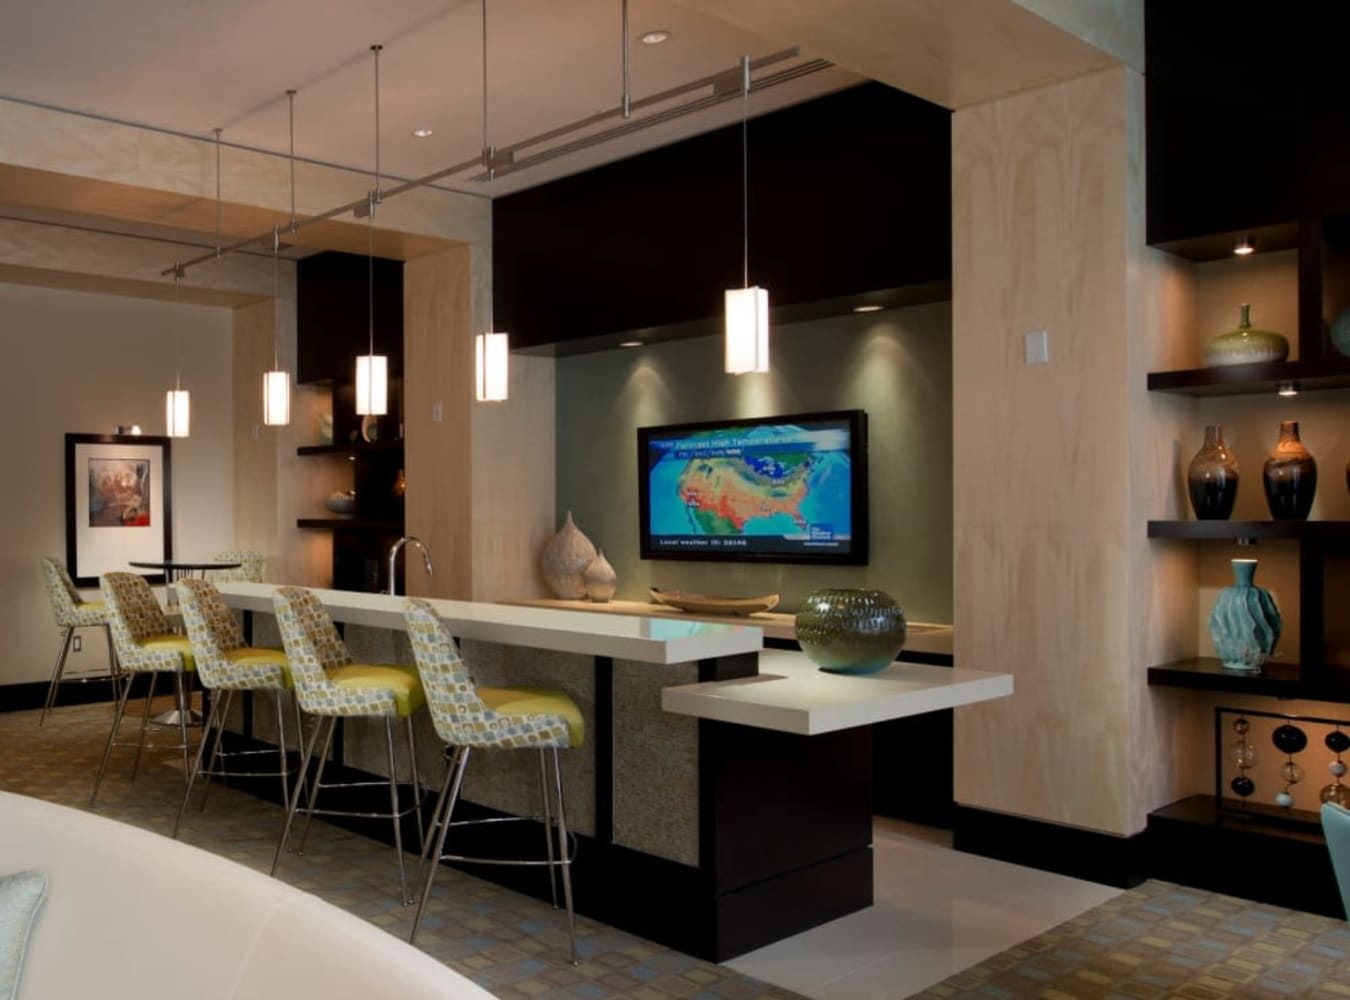 Communal dining area with bar seating at Solaire 1150 Ripley in Silver Spring, Maryland